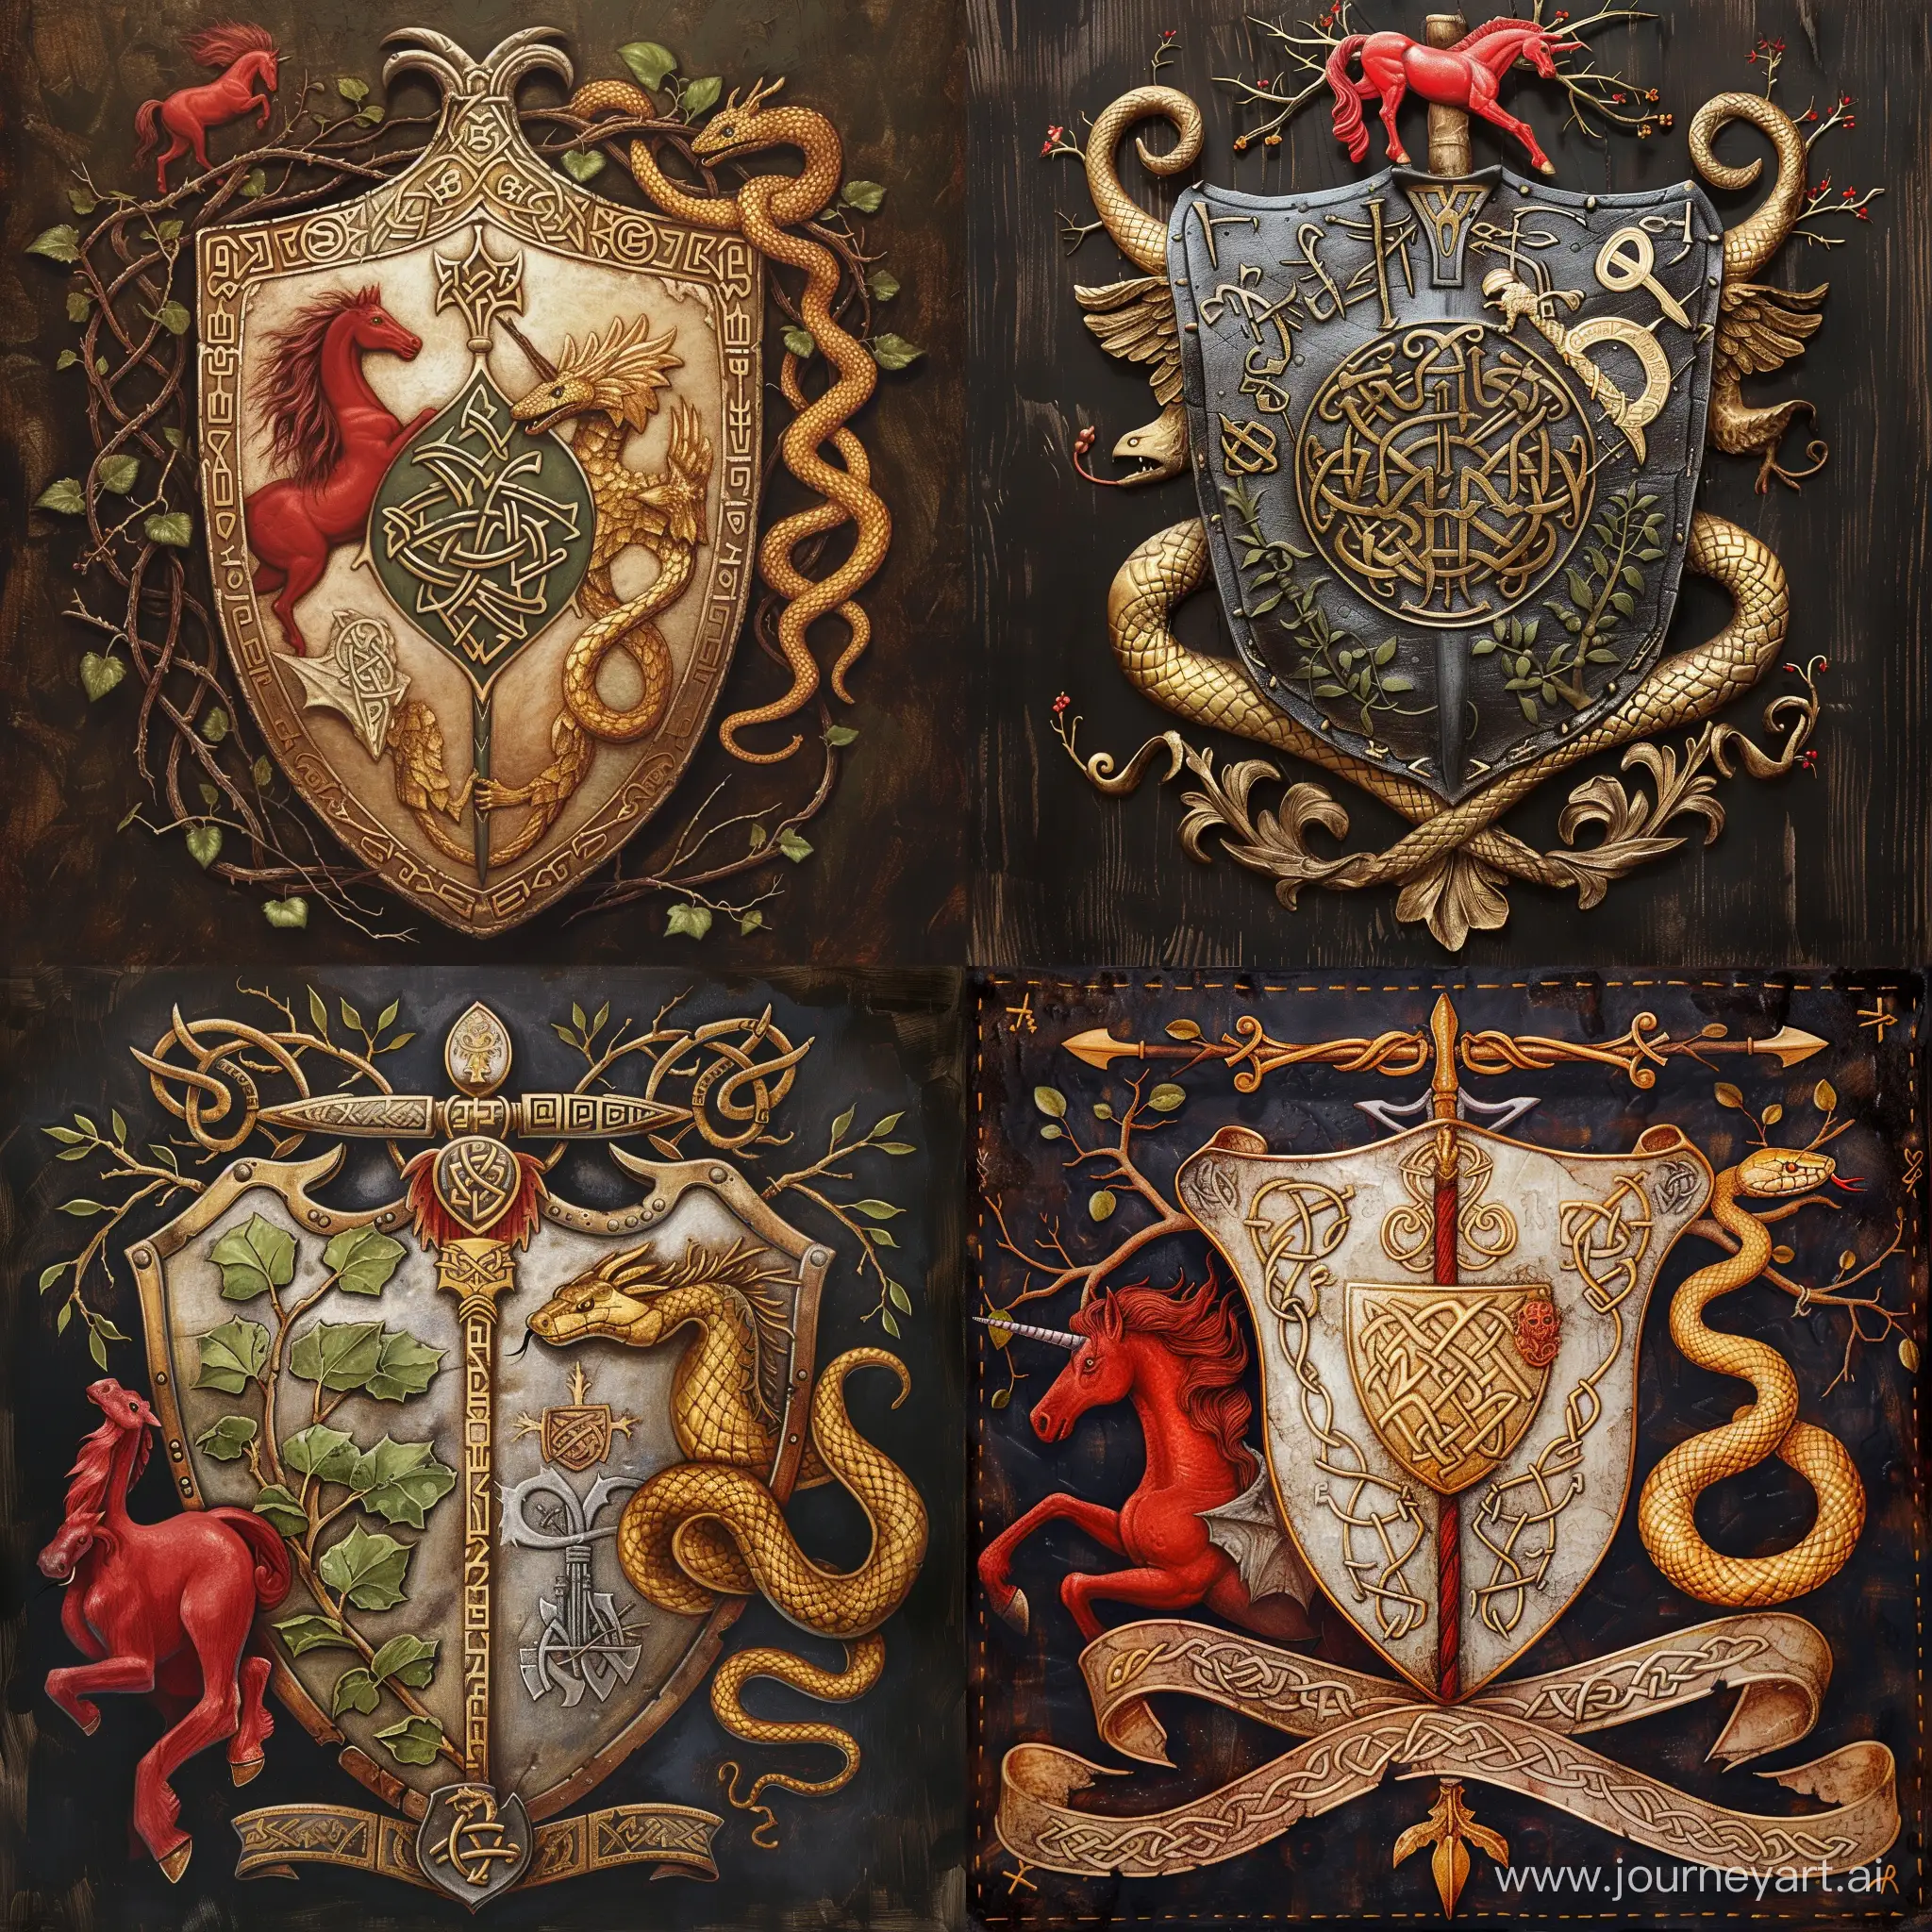 Family coat of arms, on the shield, Celtic heraldry, runes, on the right a golden snake, in the center a druid staff entwined with a vine, on the left a red pegasus, at the top branches of thorn and elder